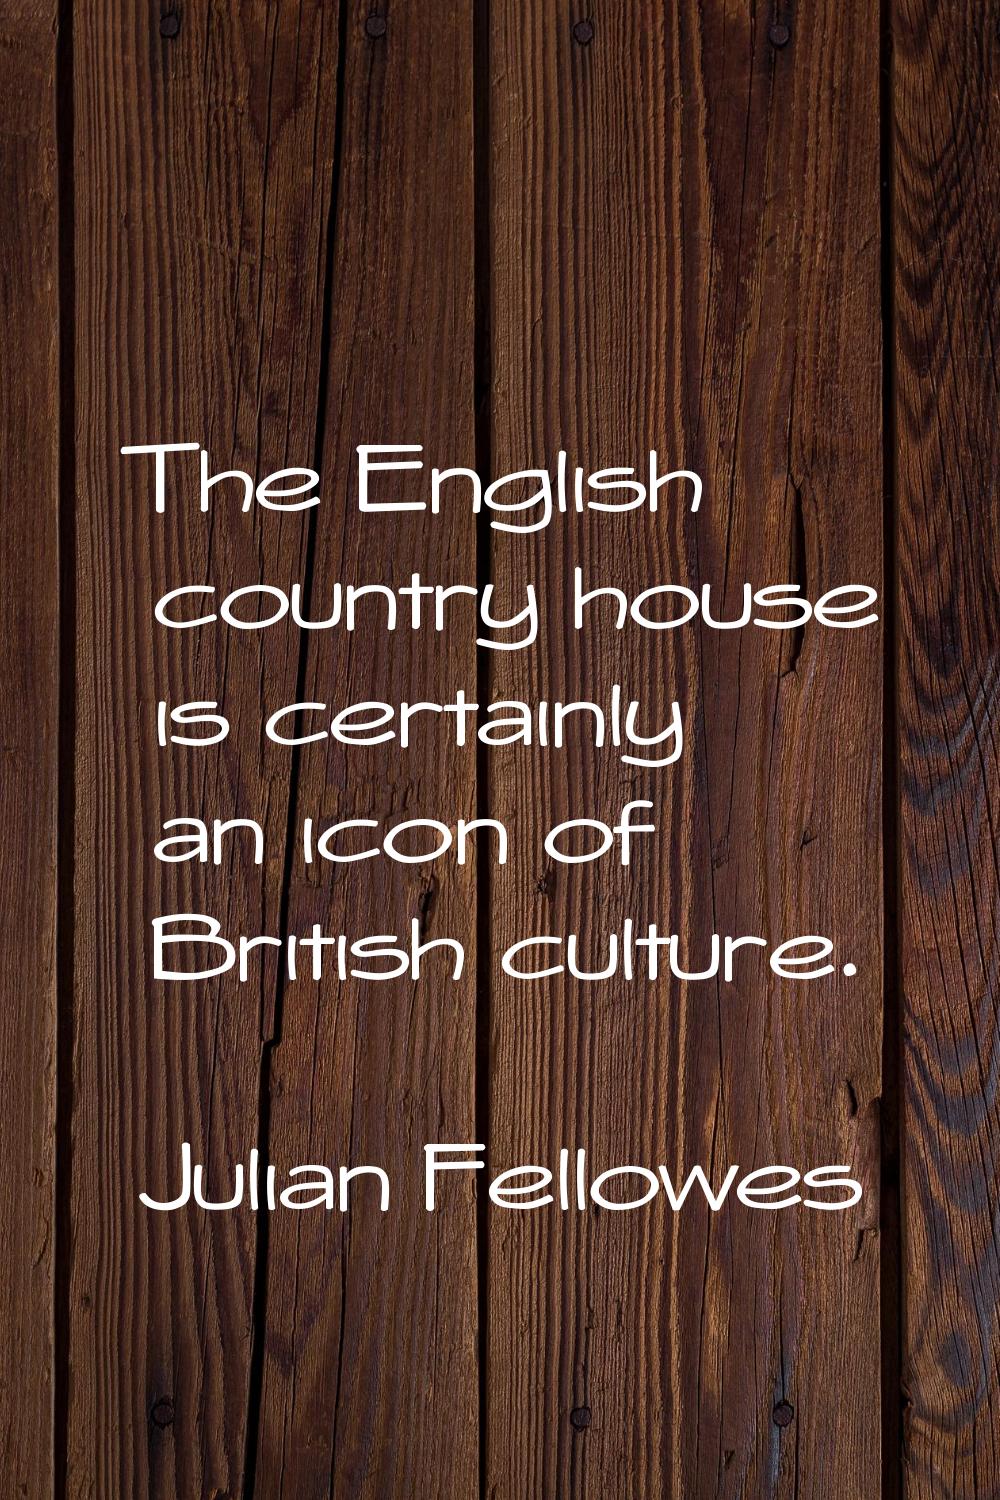 The English country house is certainly an icon of British culture.